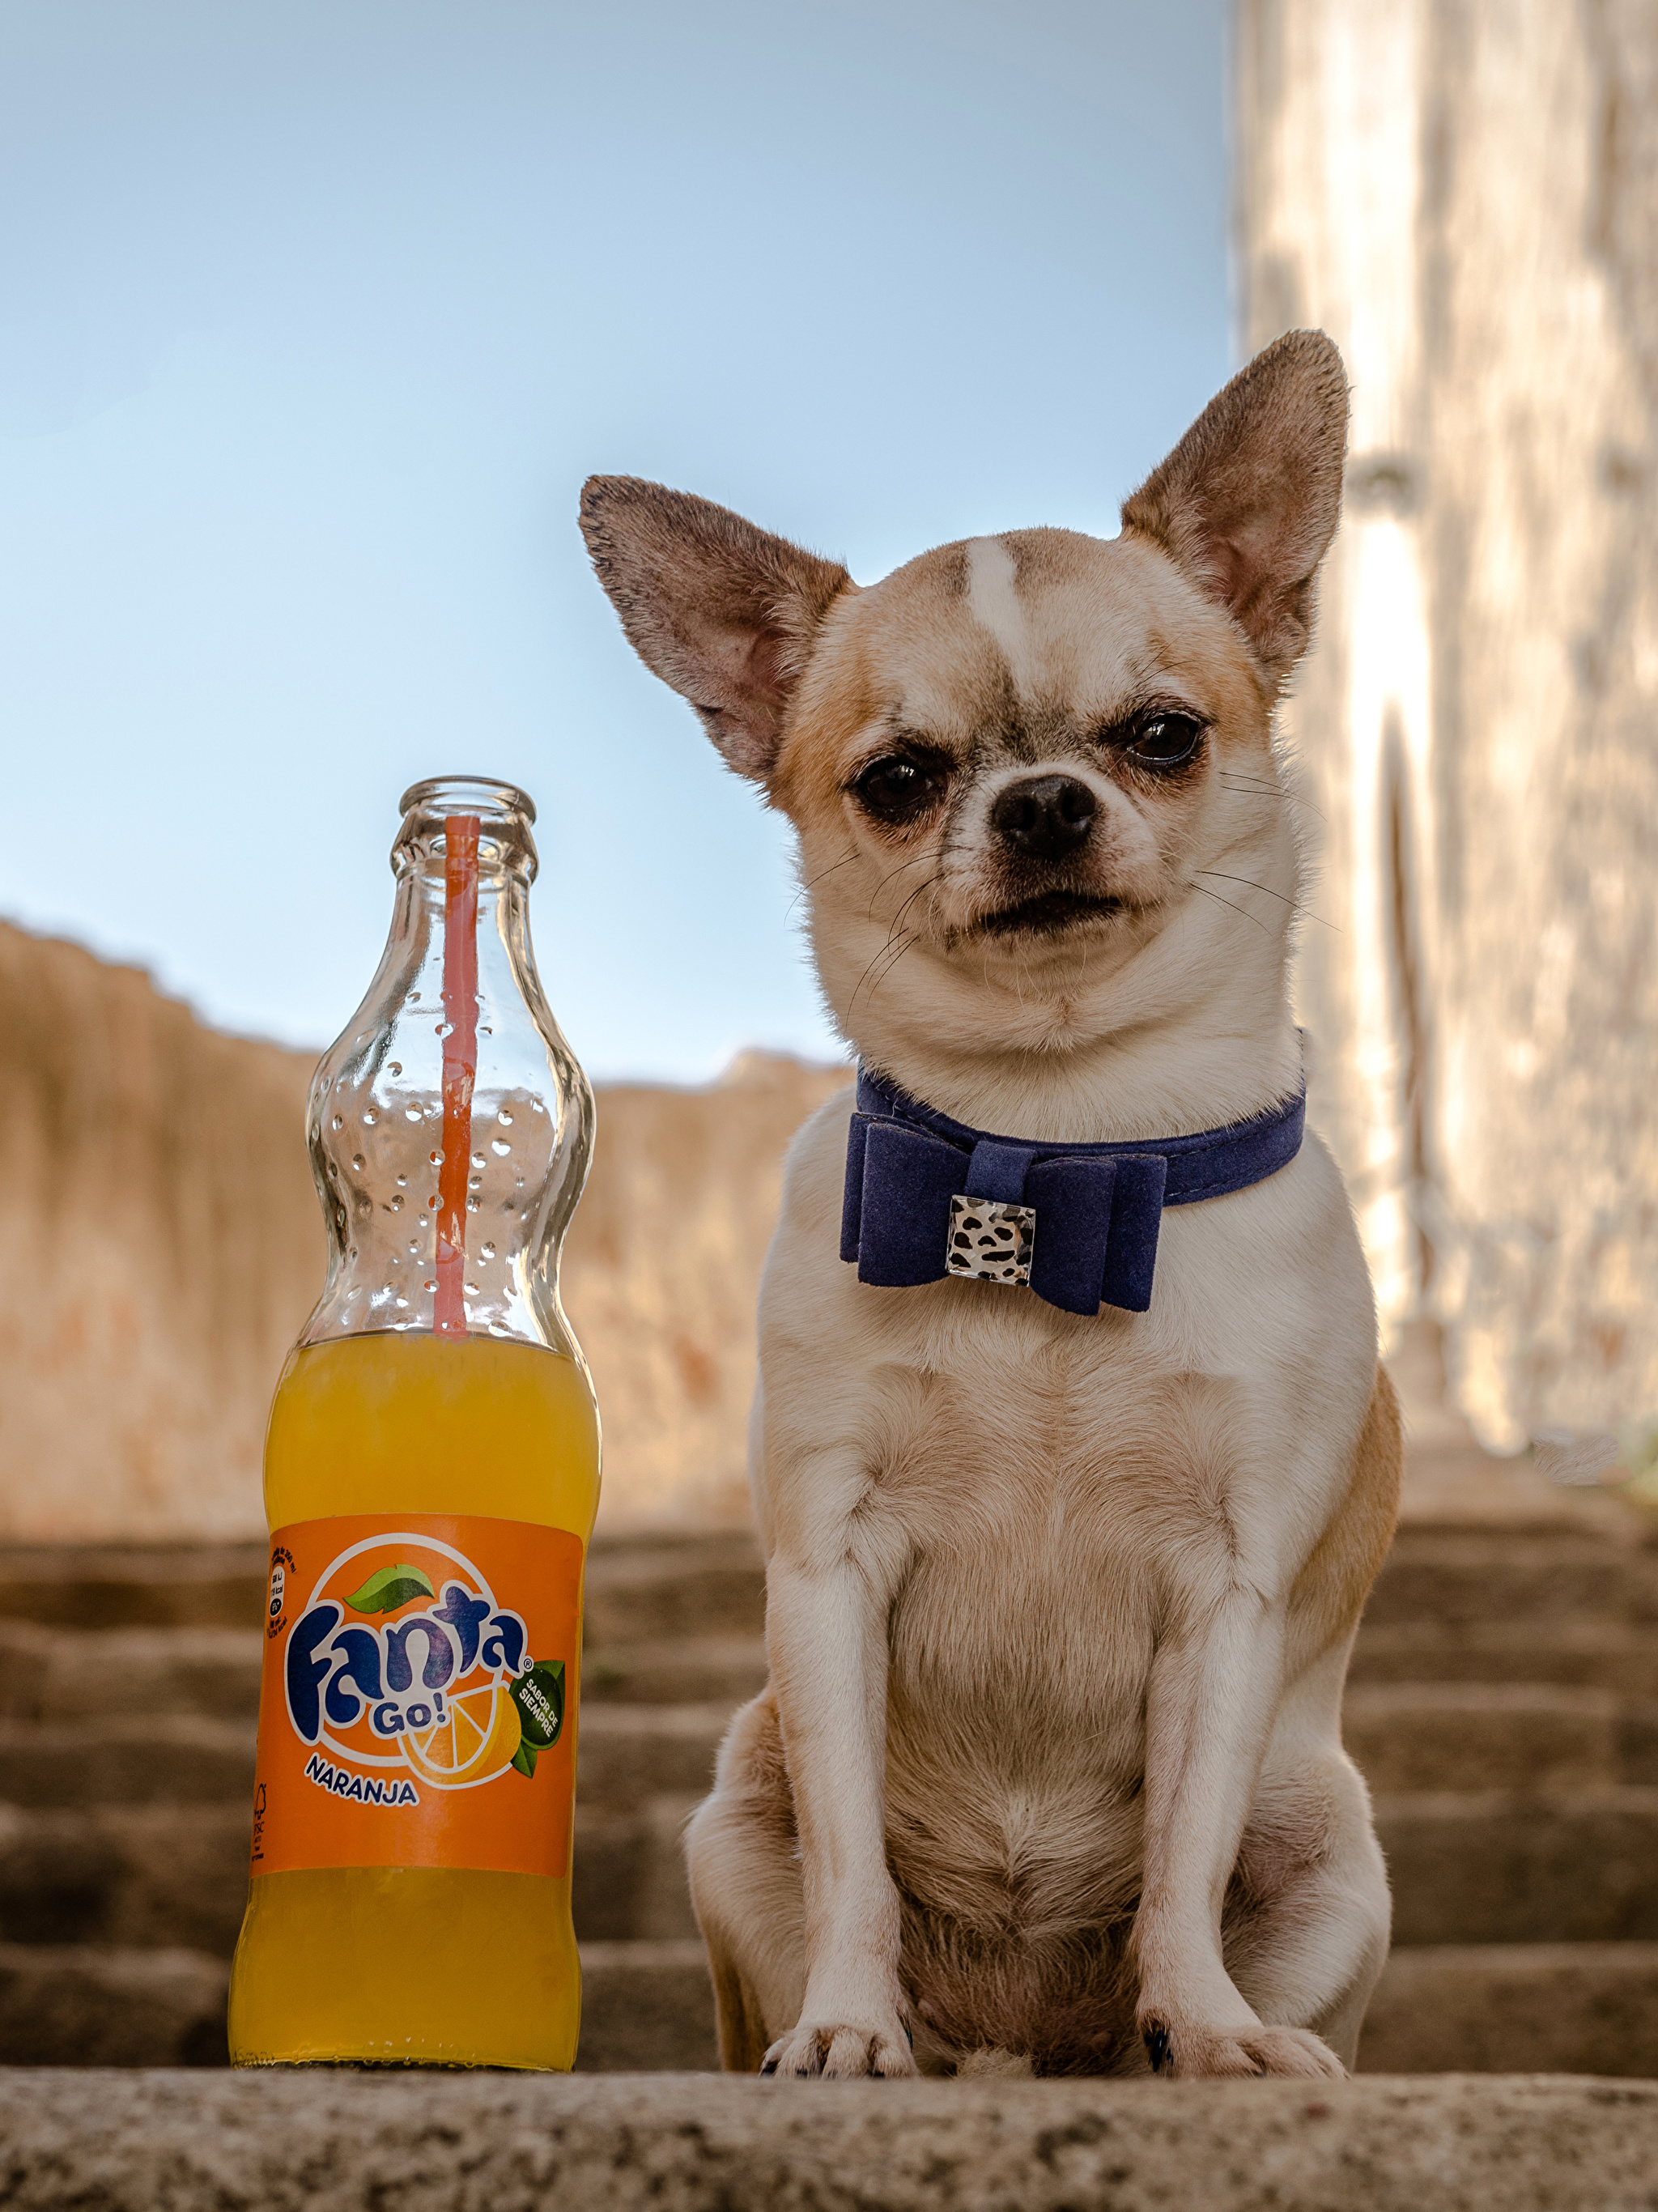 Wallpaper Chihuahua Dogs Fanta stairway Bottle Glance 2048x2732